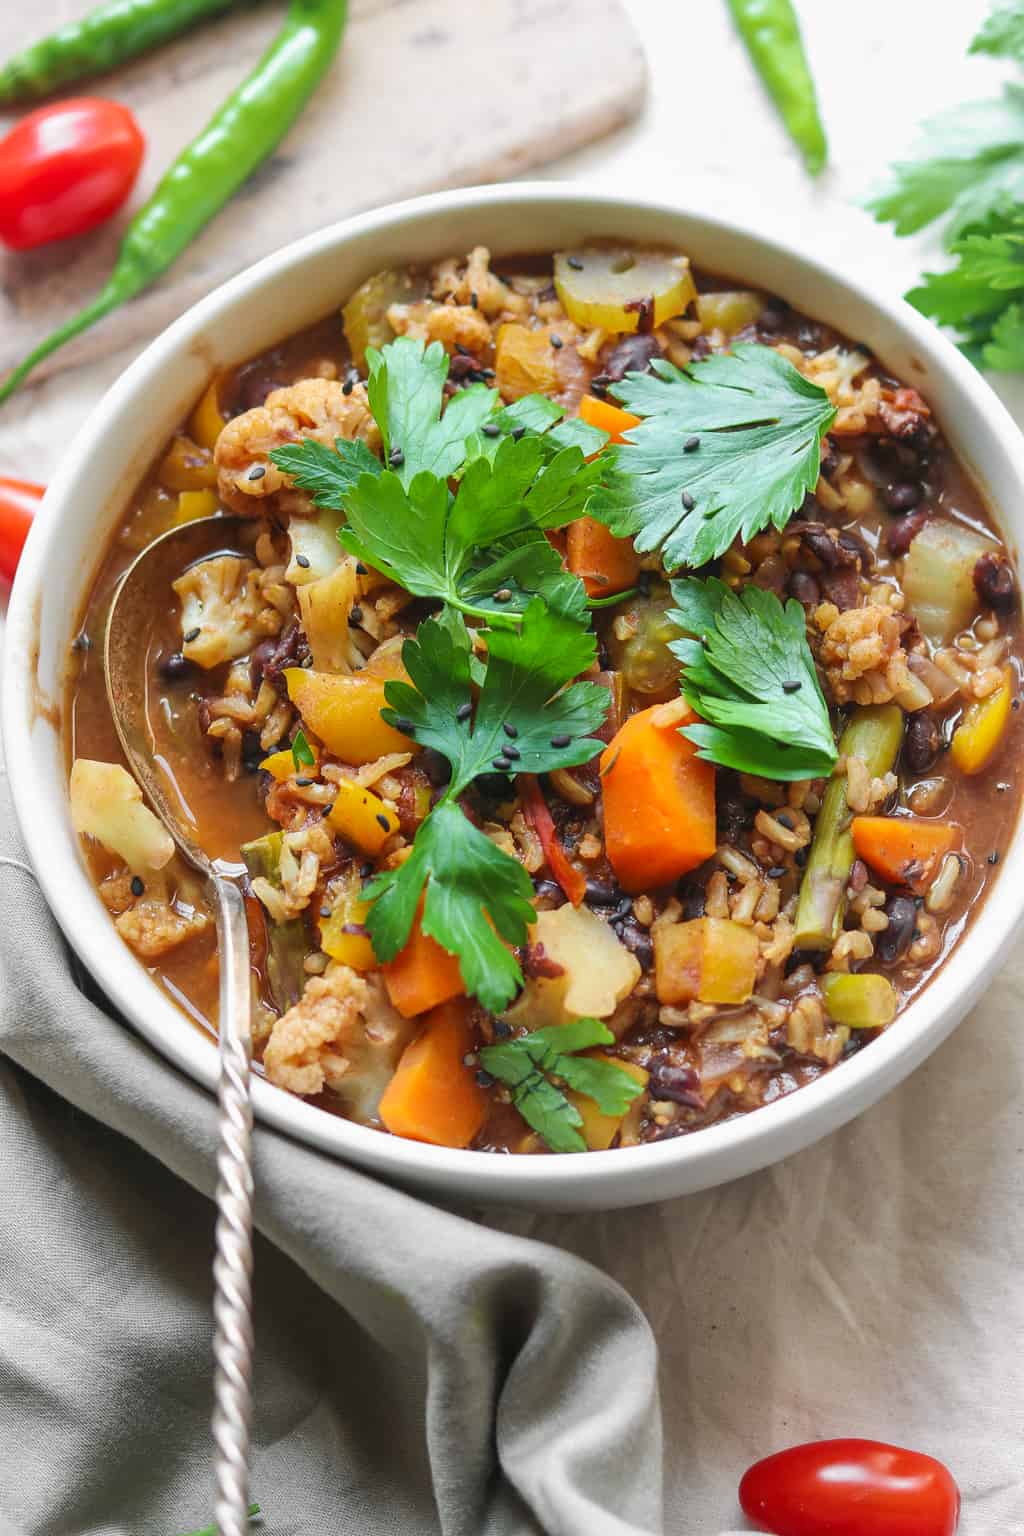 Oil-free healthy vegan black bean soup with rice and vegetables